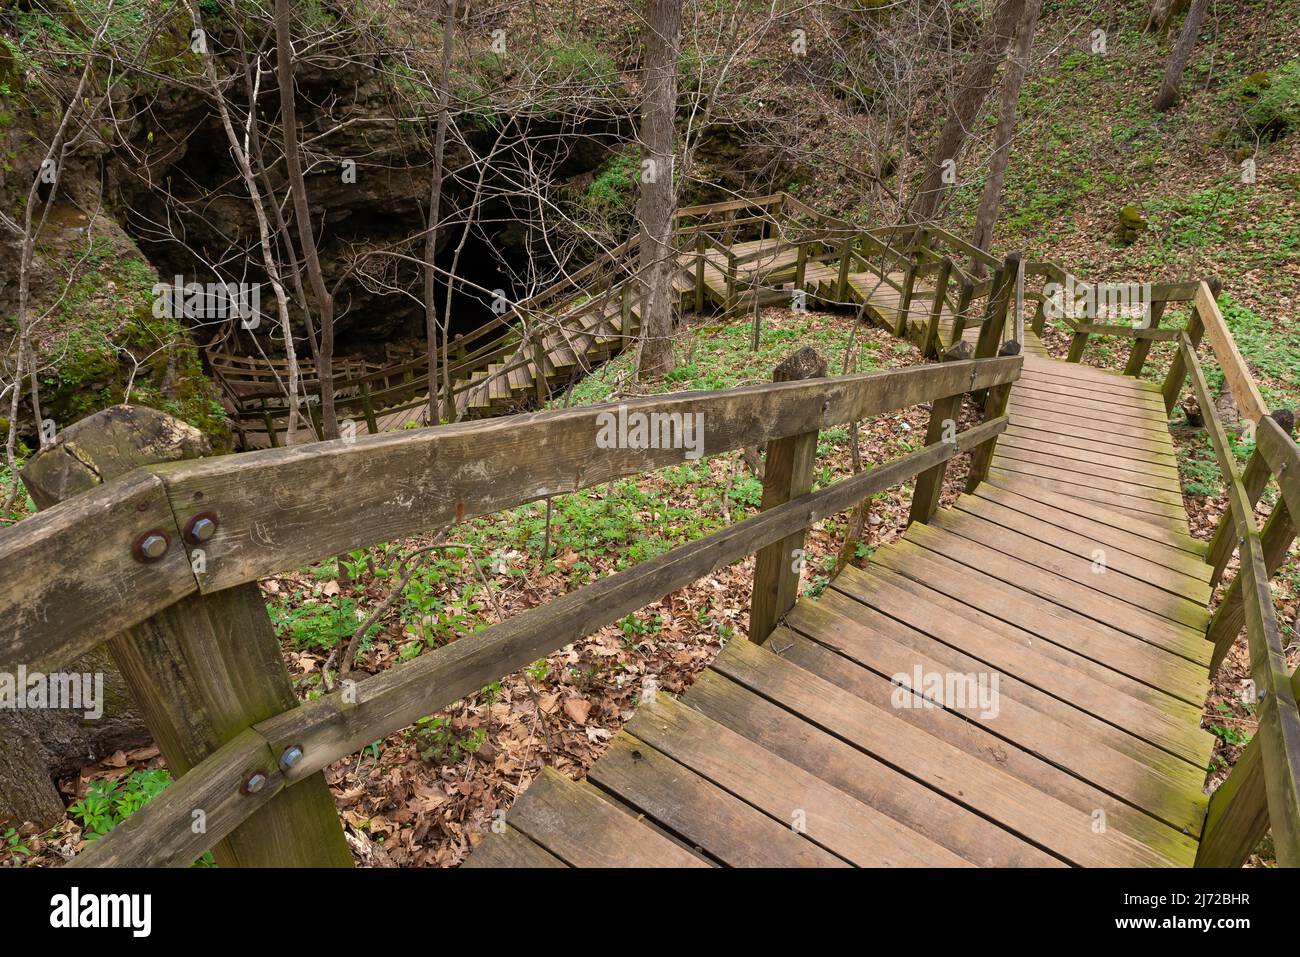 Wooden walkway leading to Dancehall Cave at Maquoketa Caves State Park, Iowa. Stock Photo